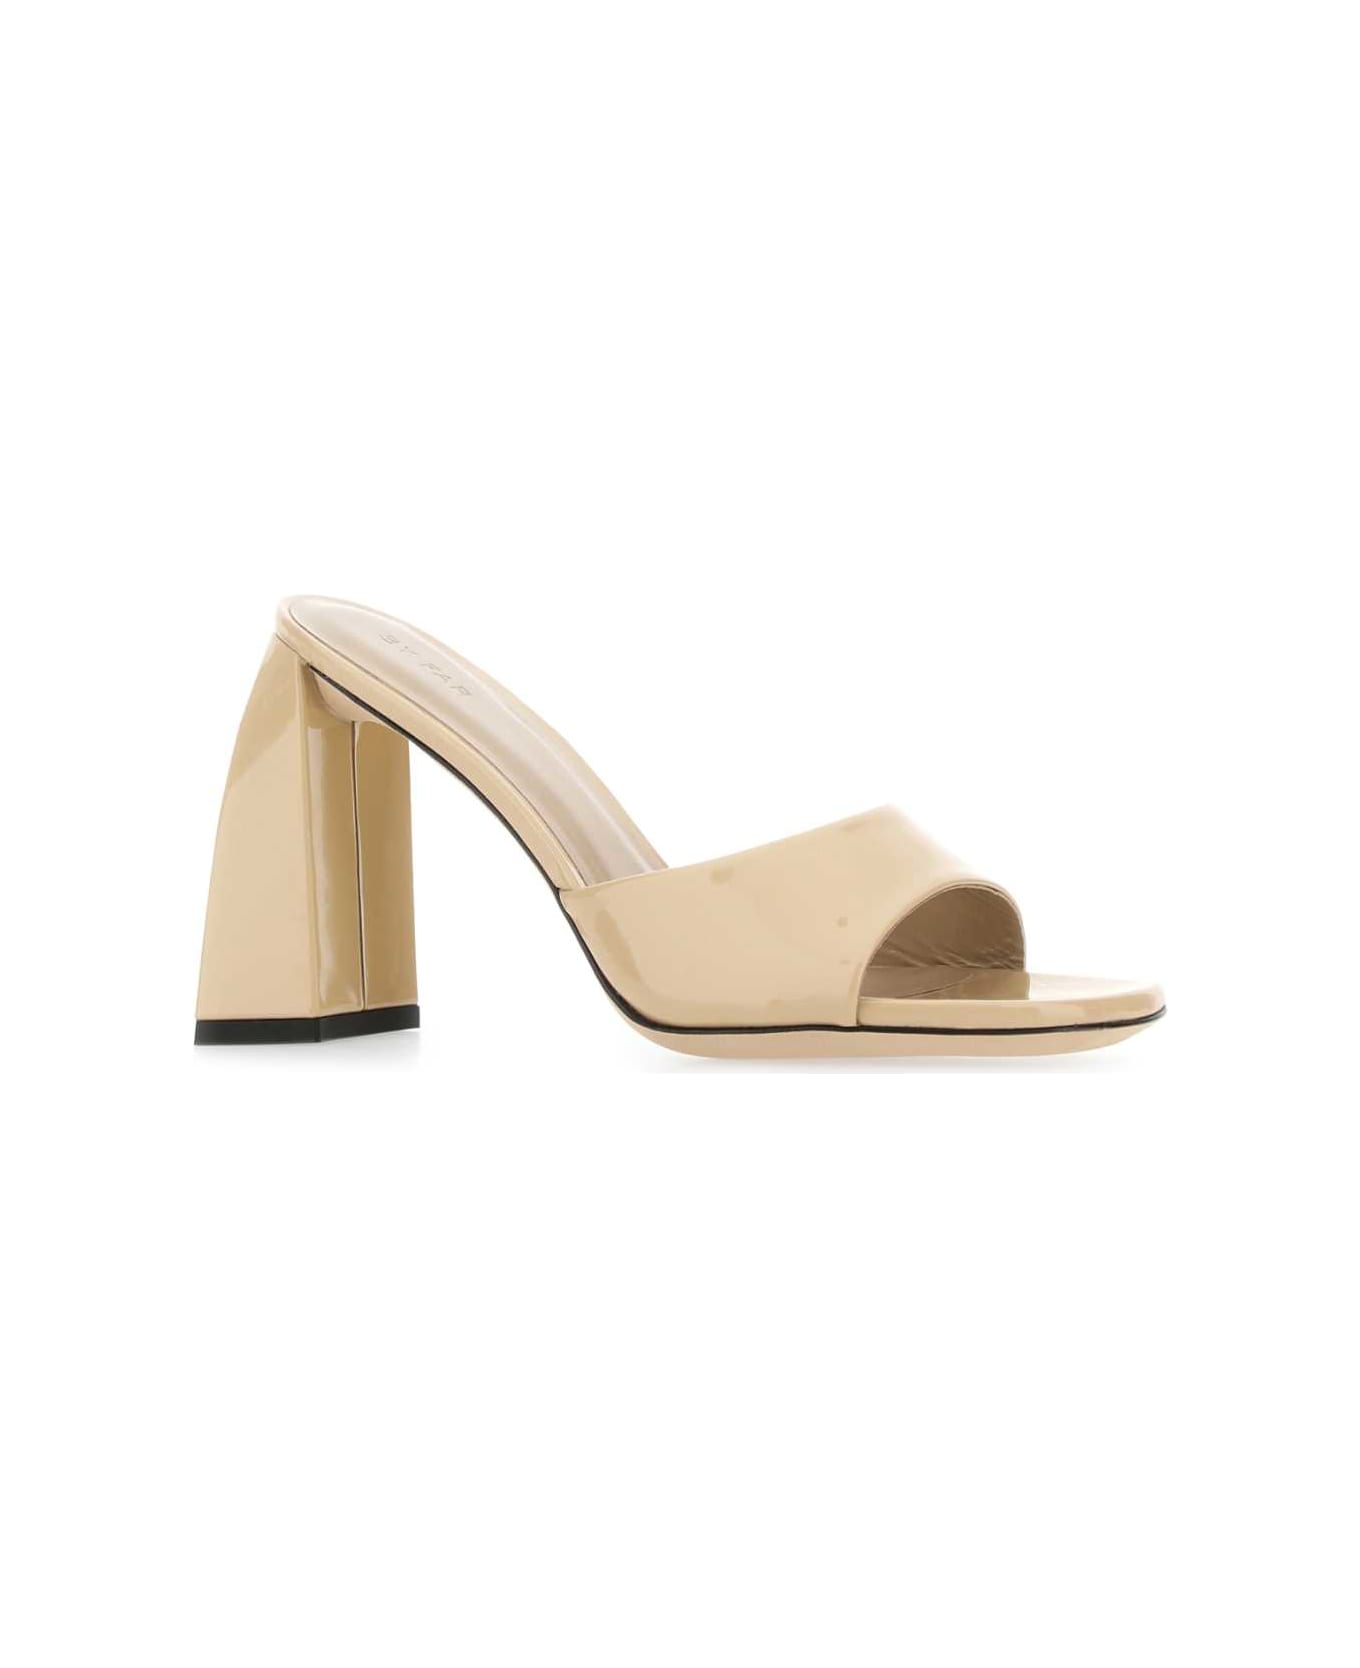 BY FAR Sand Leather Michele Mules - Beige